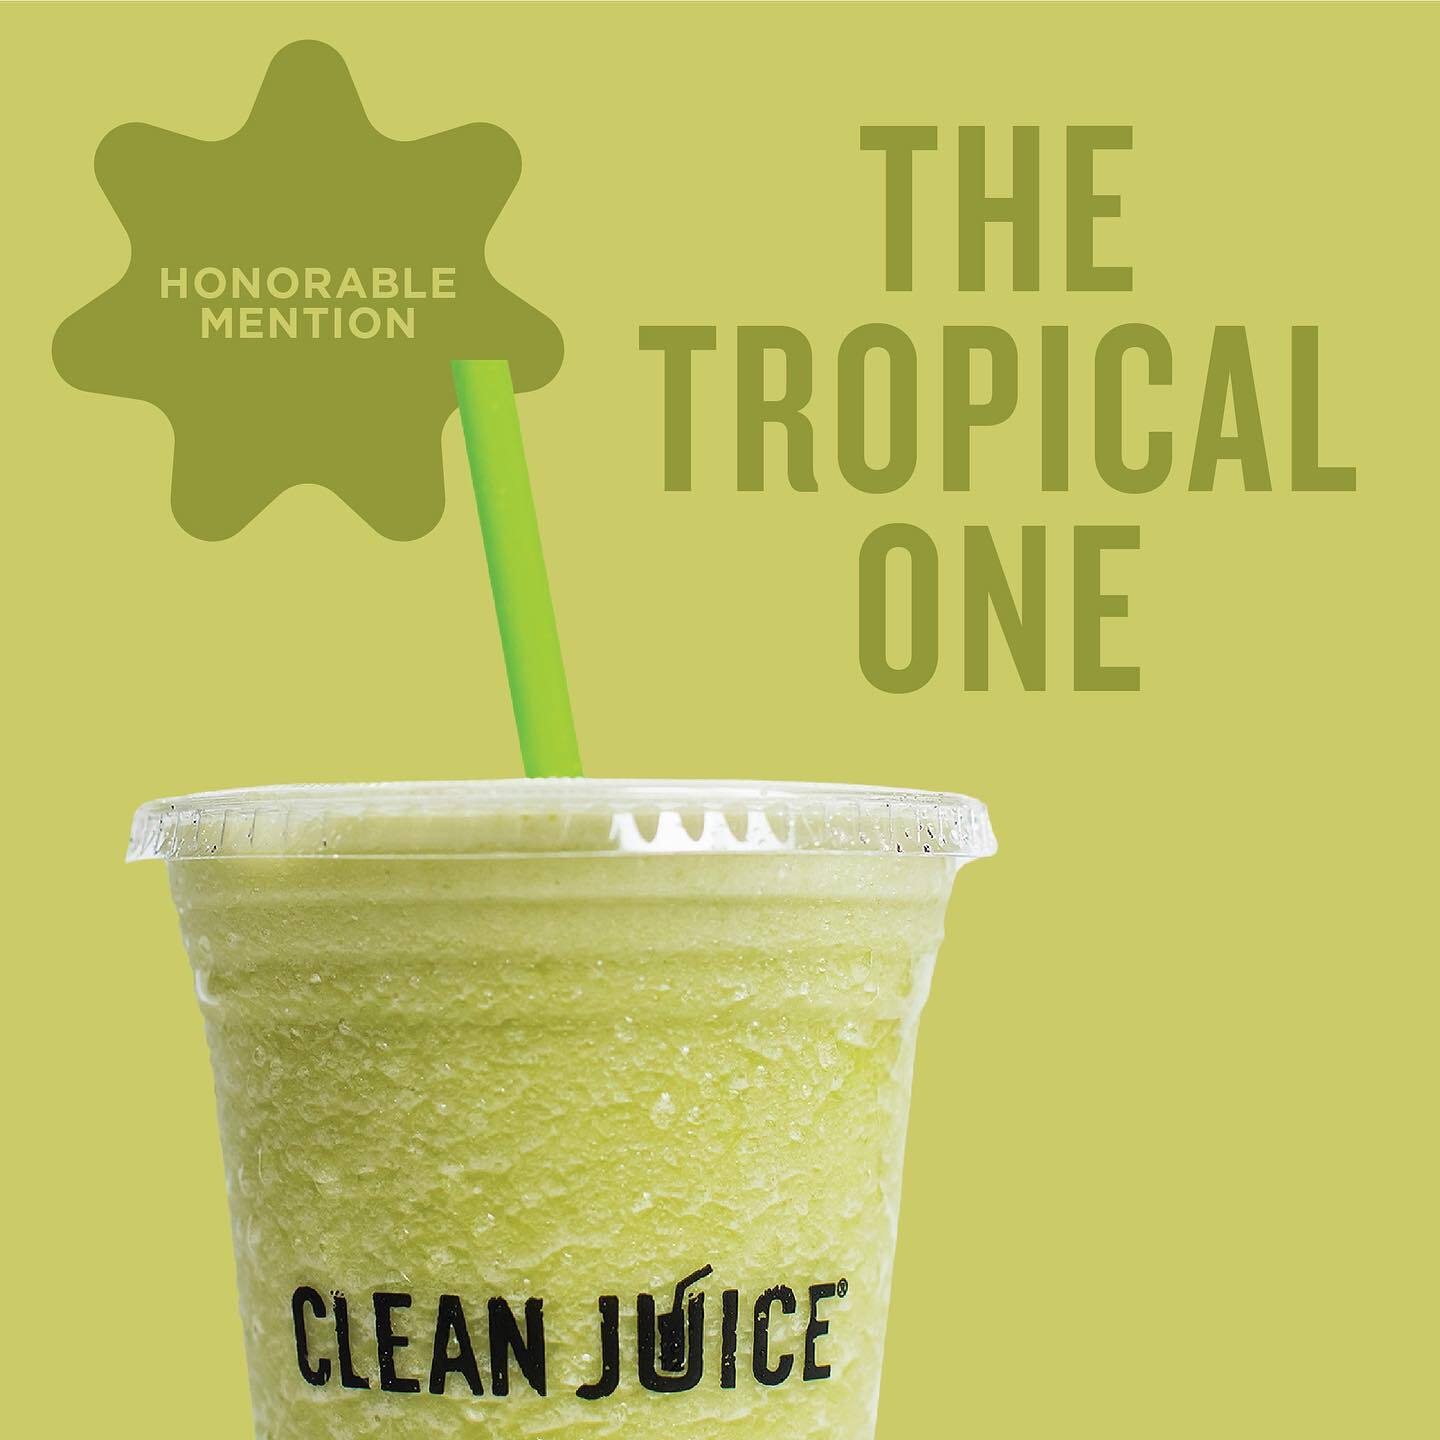 Light green The Tropical One smoothie from Clean Juice